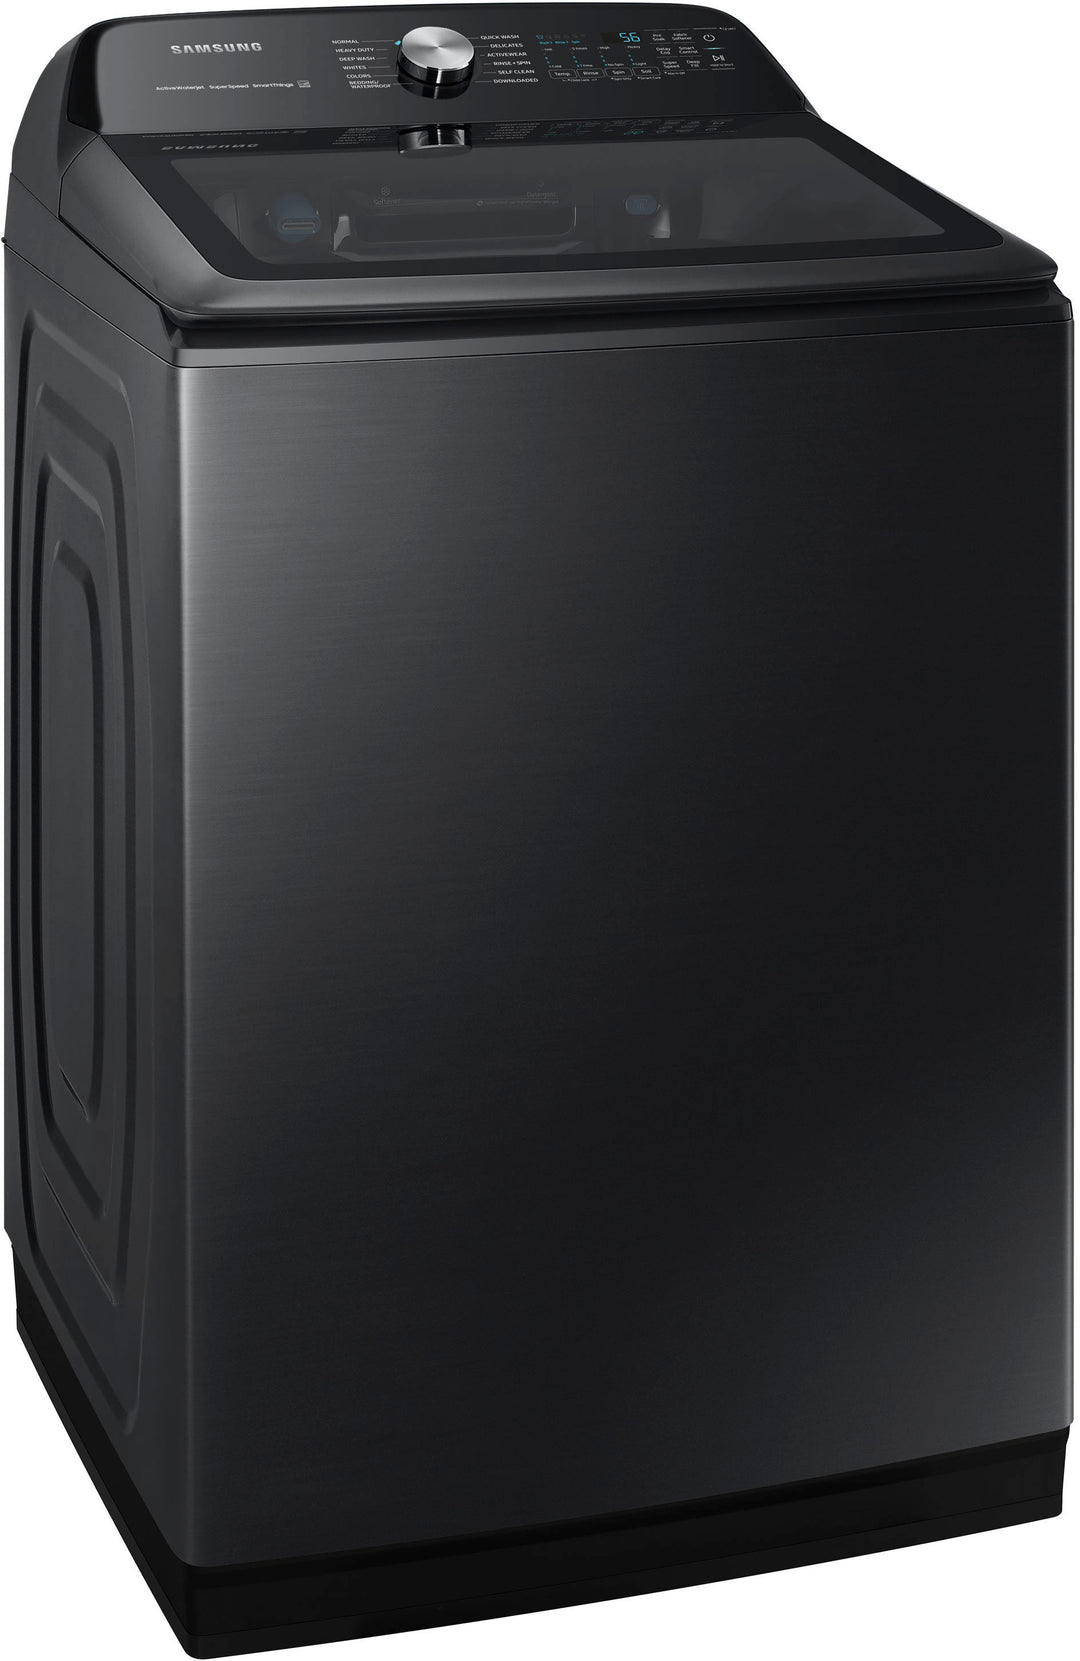 Samsung - 5.2 cu. ft. Large Capacity Smart Top Load Washer with Super Speed Wash - Brushed Black_9